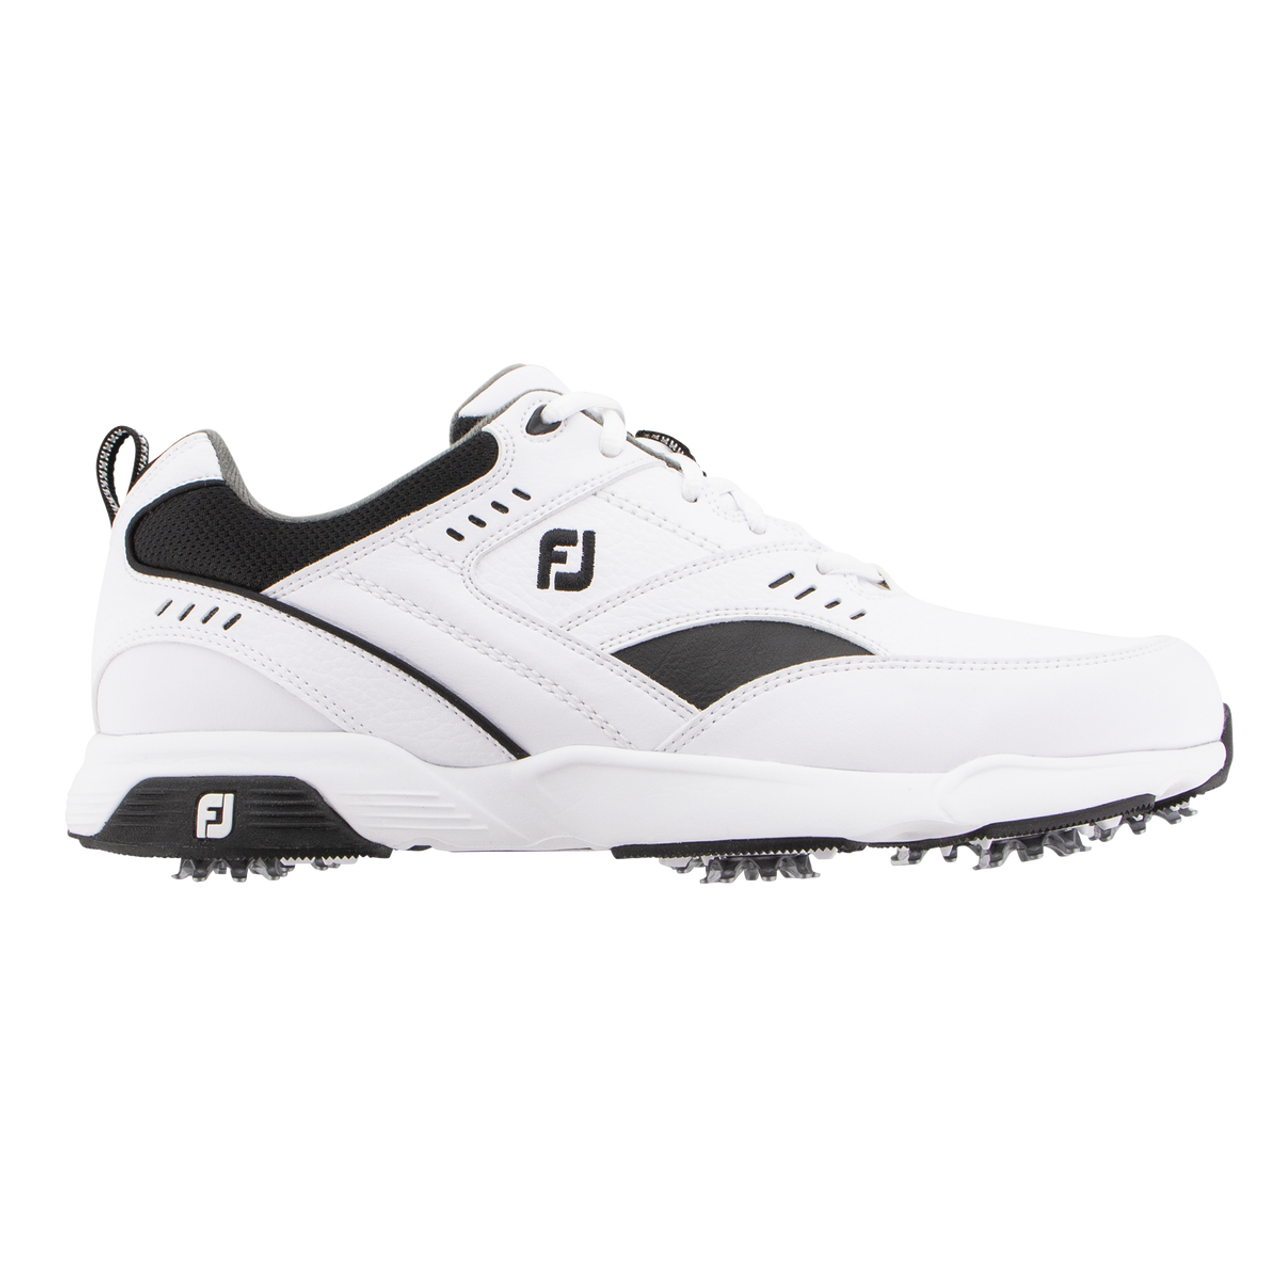 FootJoy Specialty Golf Shoes (White/Black) 56722